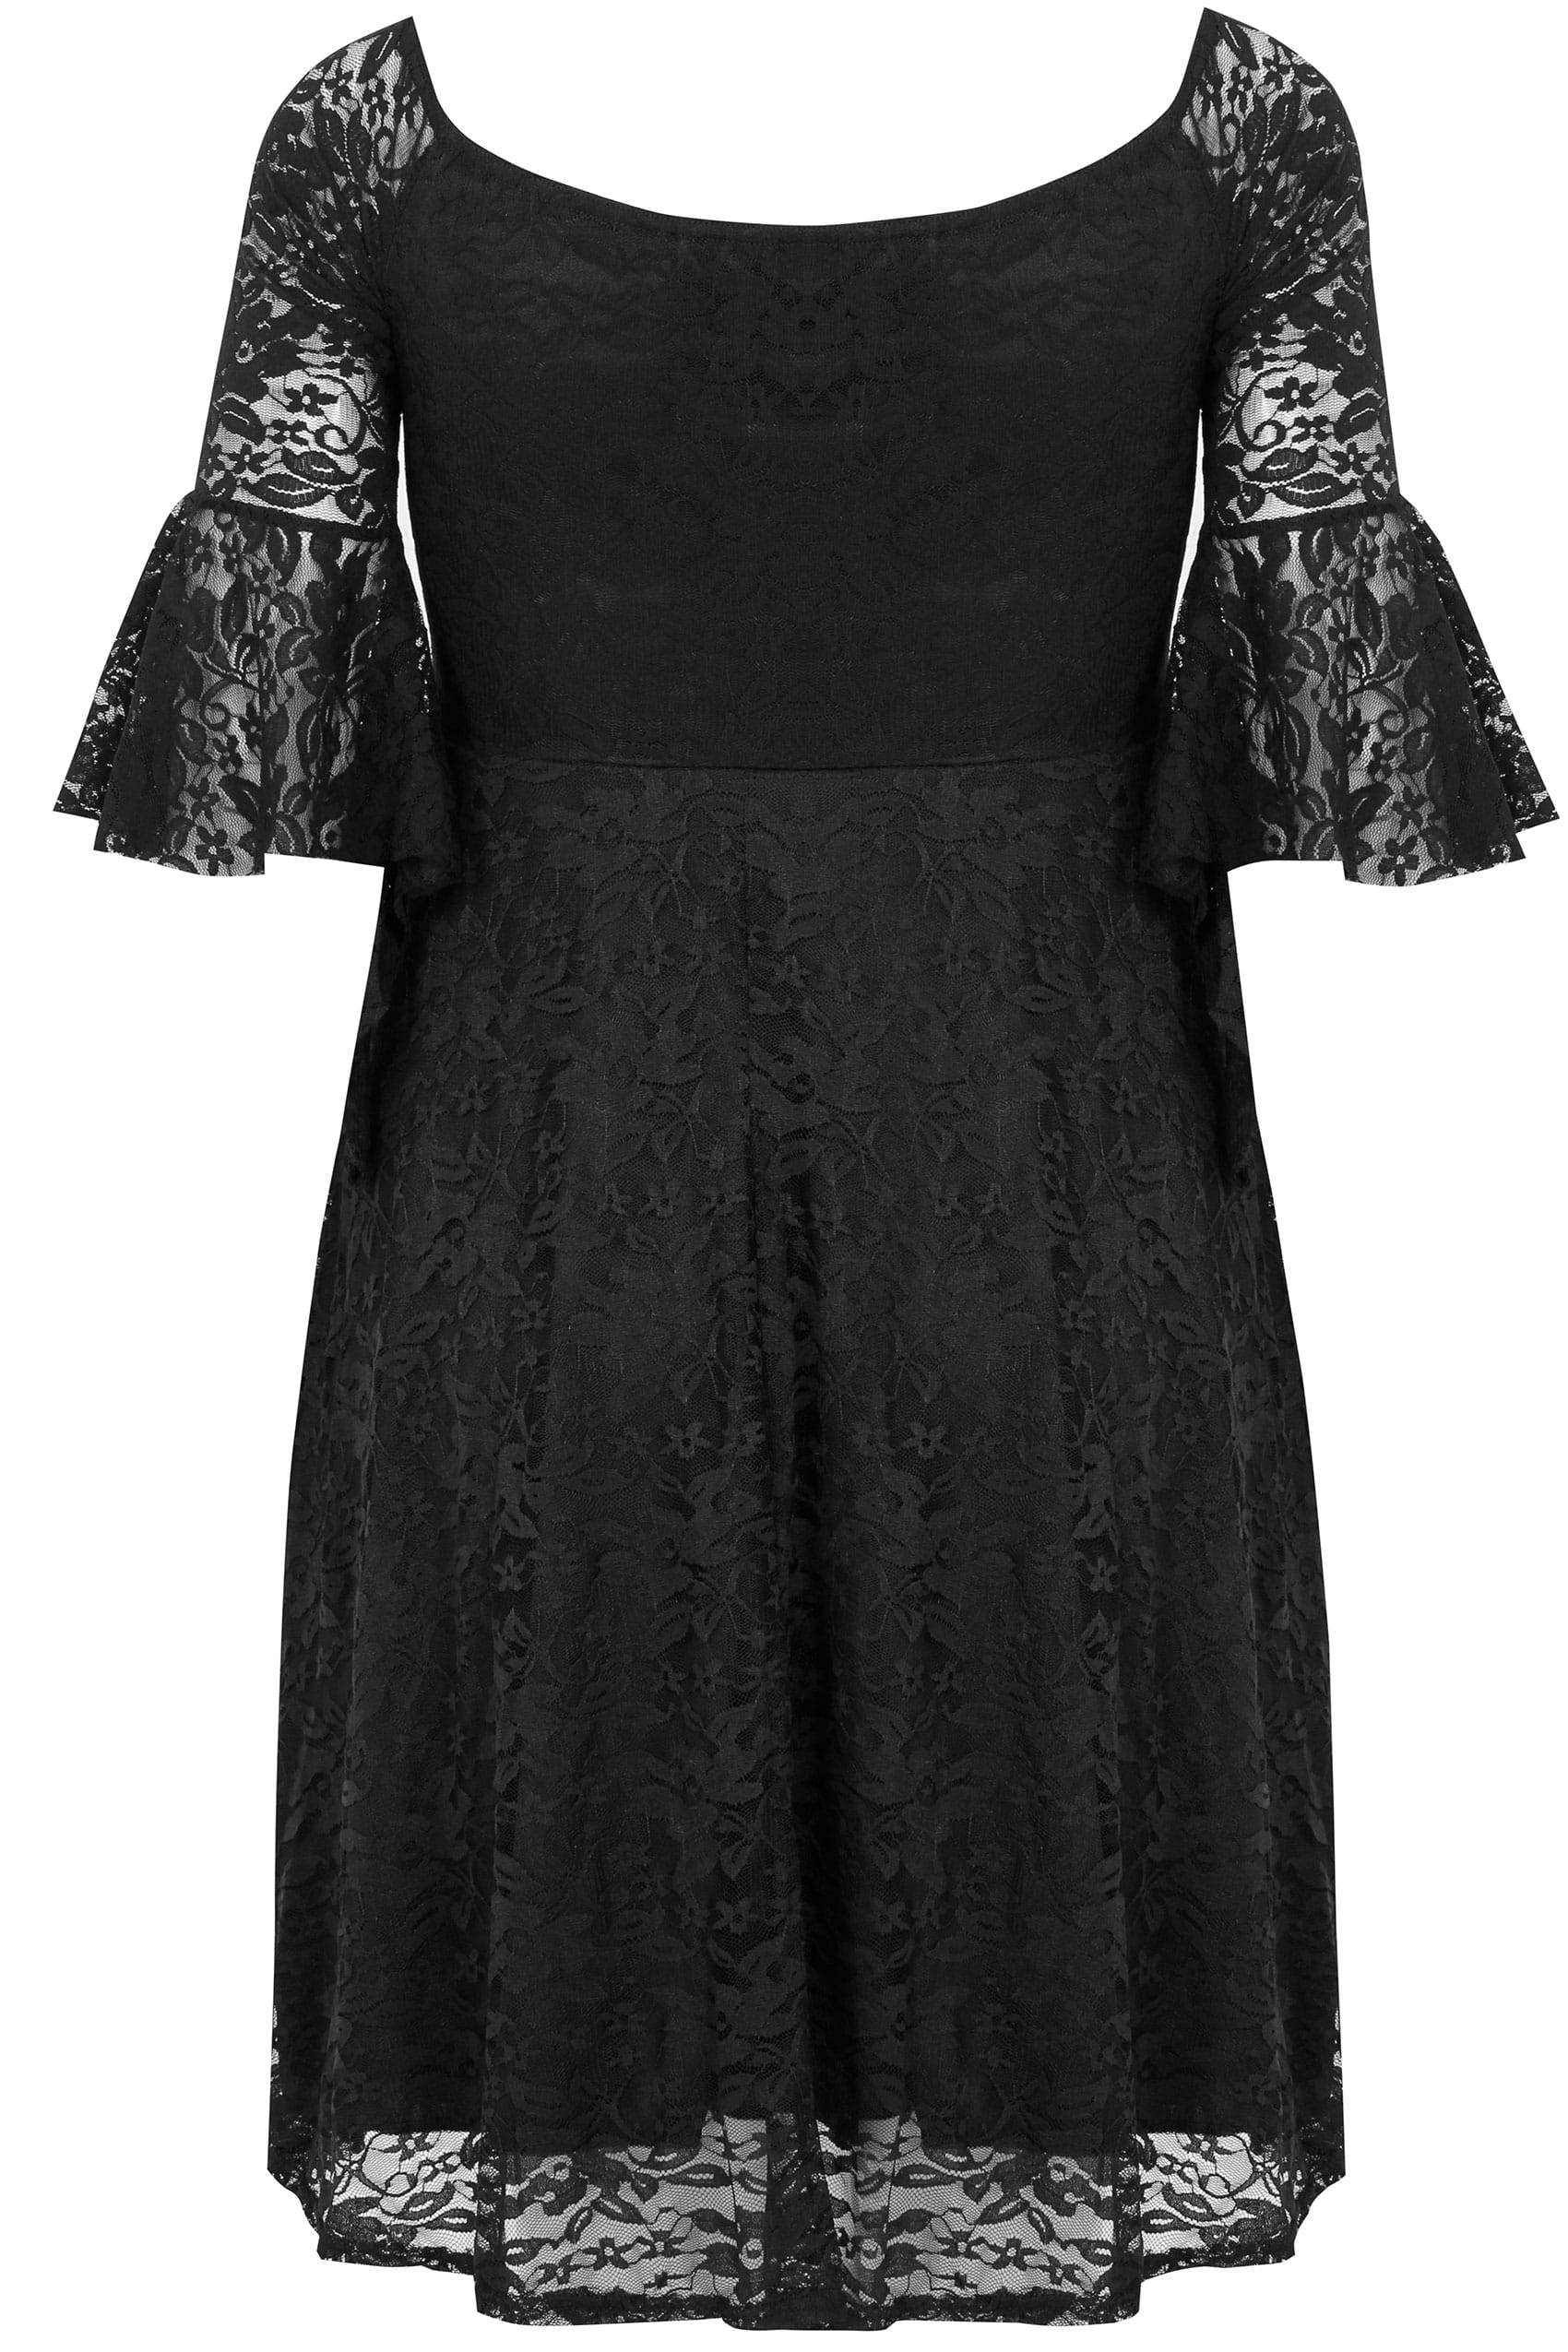 LIMITED COLLECTION Black Bardot Lace Dress With Flute Sleeves, Plus ...